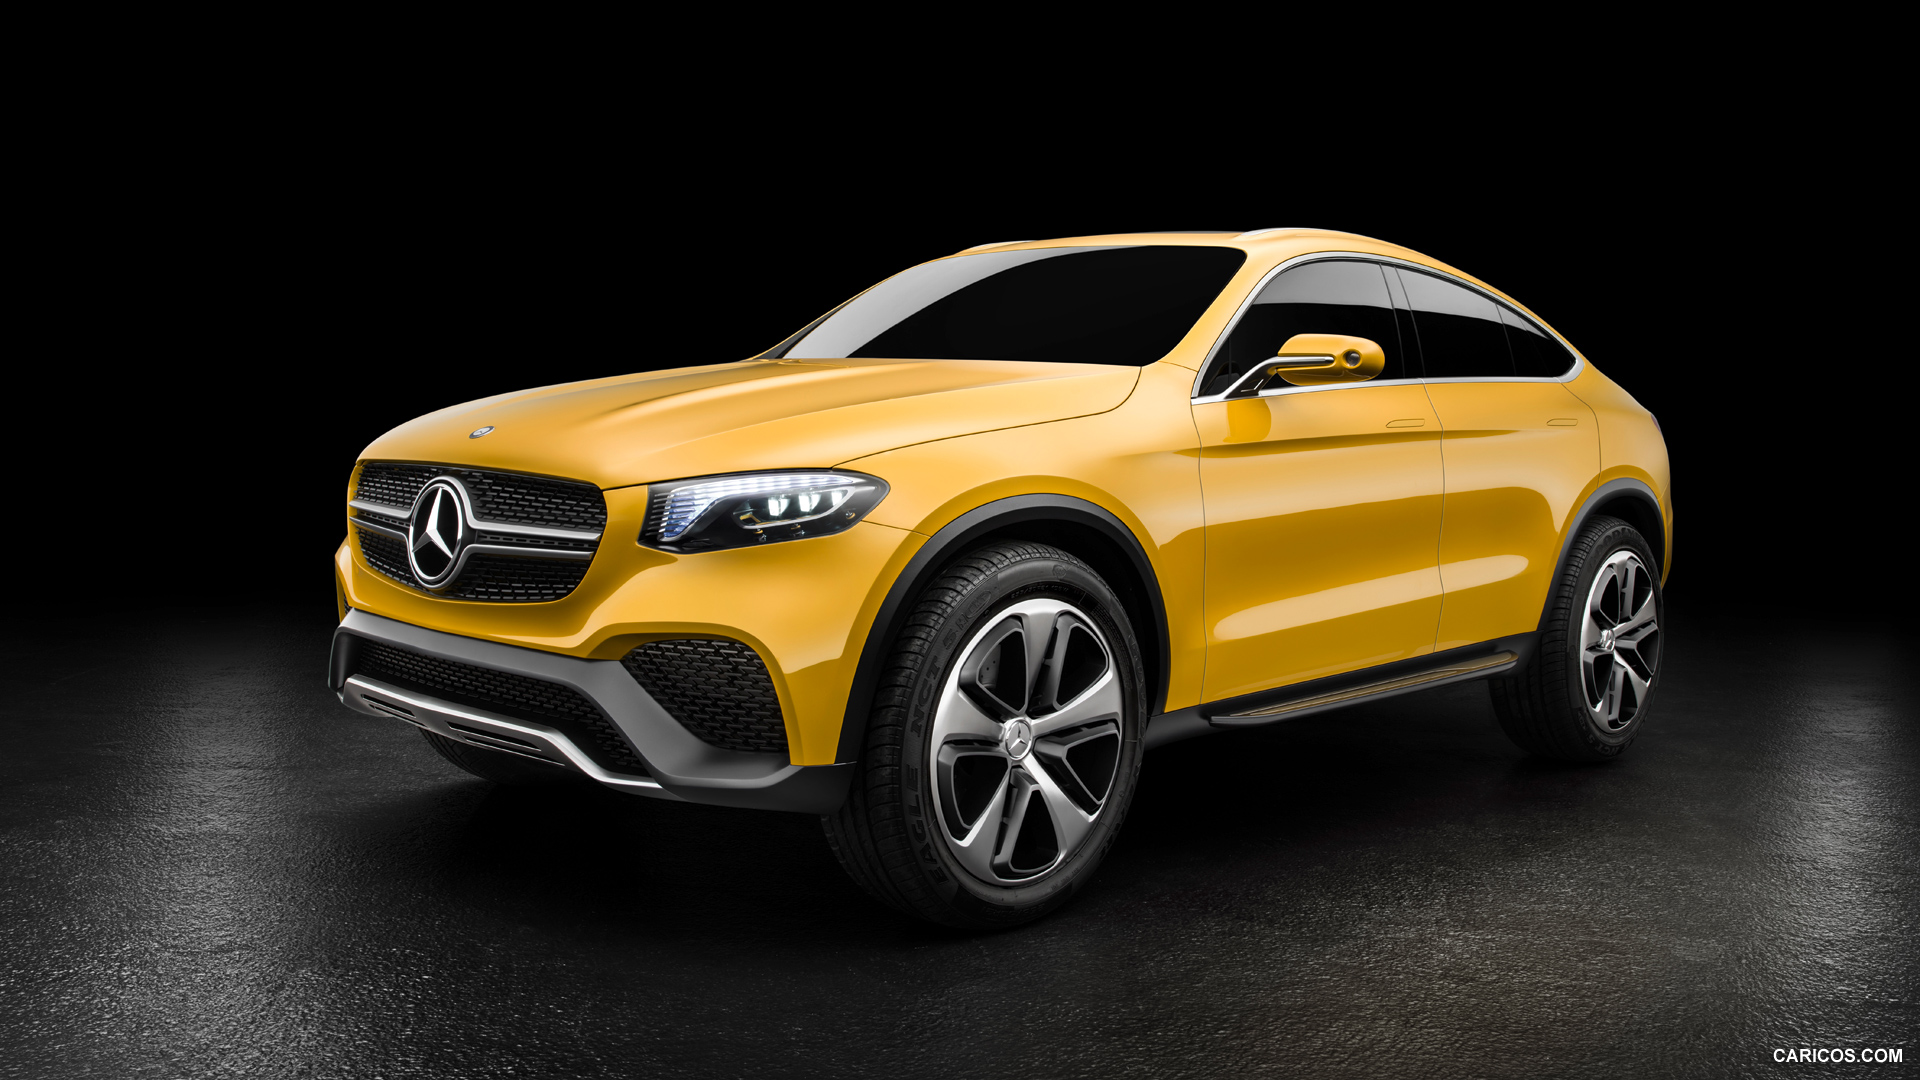 2015 Mercedes-Benz GLC Coupe Concept  - Front, #10 of 16